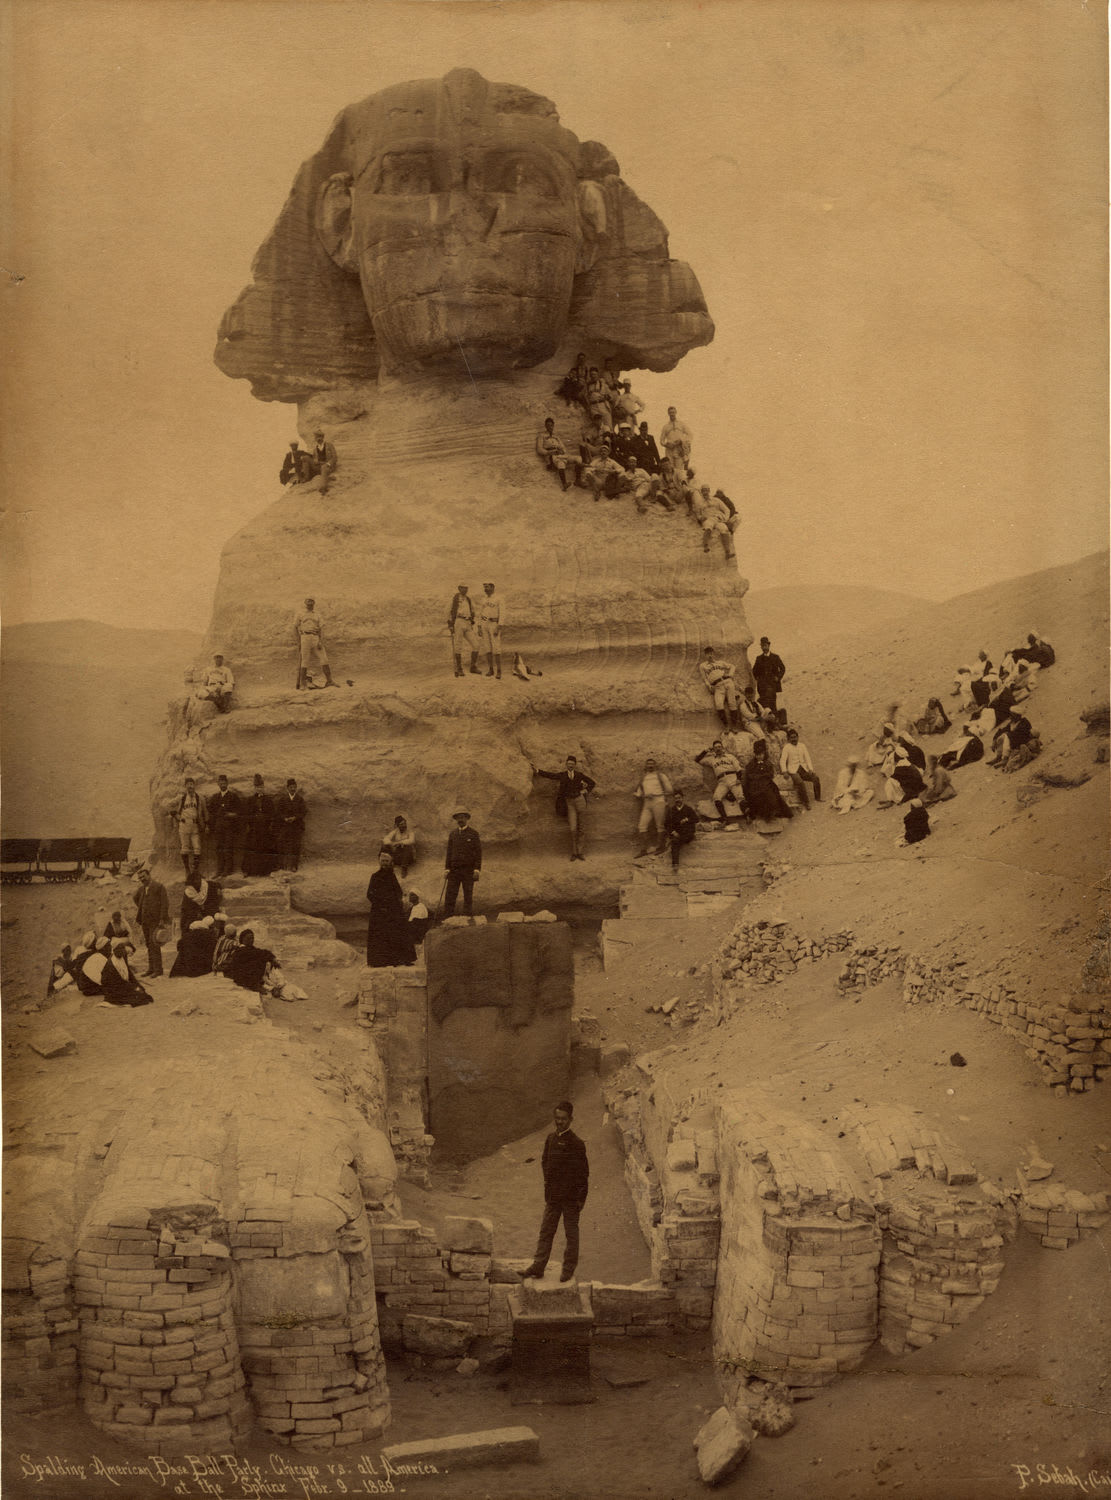 The members of the National League's around the world tour in 1888-89, pose on the Great Sphinx in Giza, Egypt, for a portrait in February of 1889.